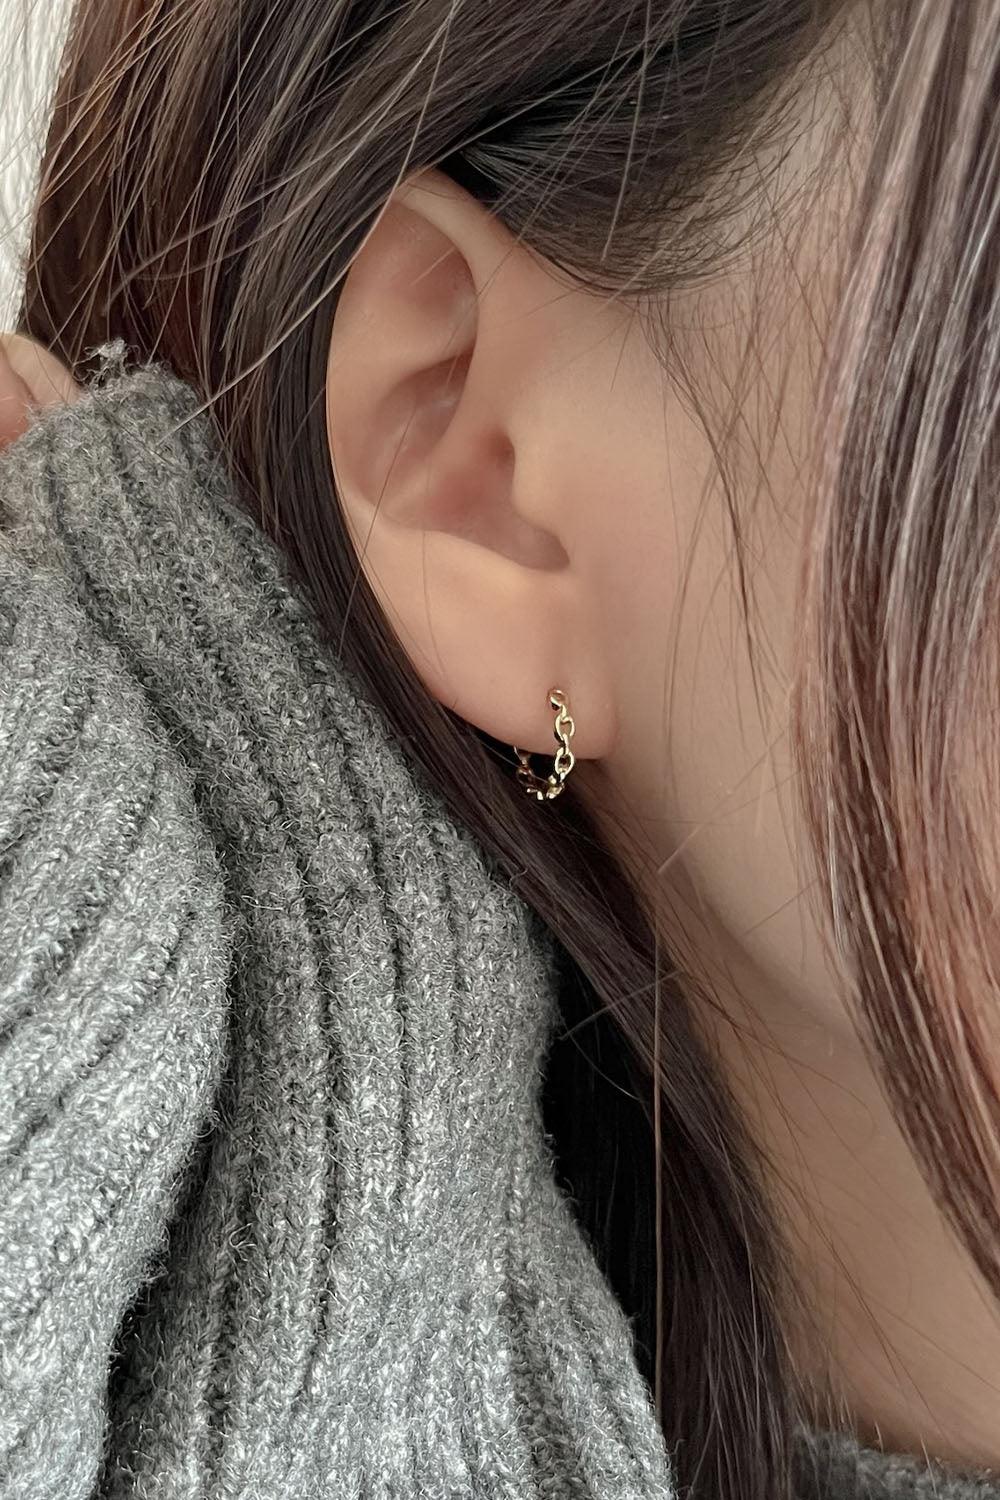 14k chain one touch earring 韓国アクセサリー、軟骨ピアス 